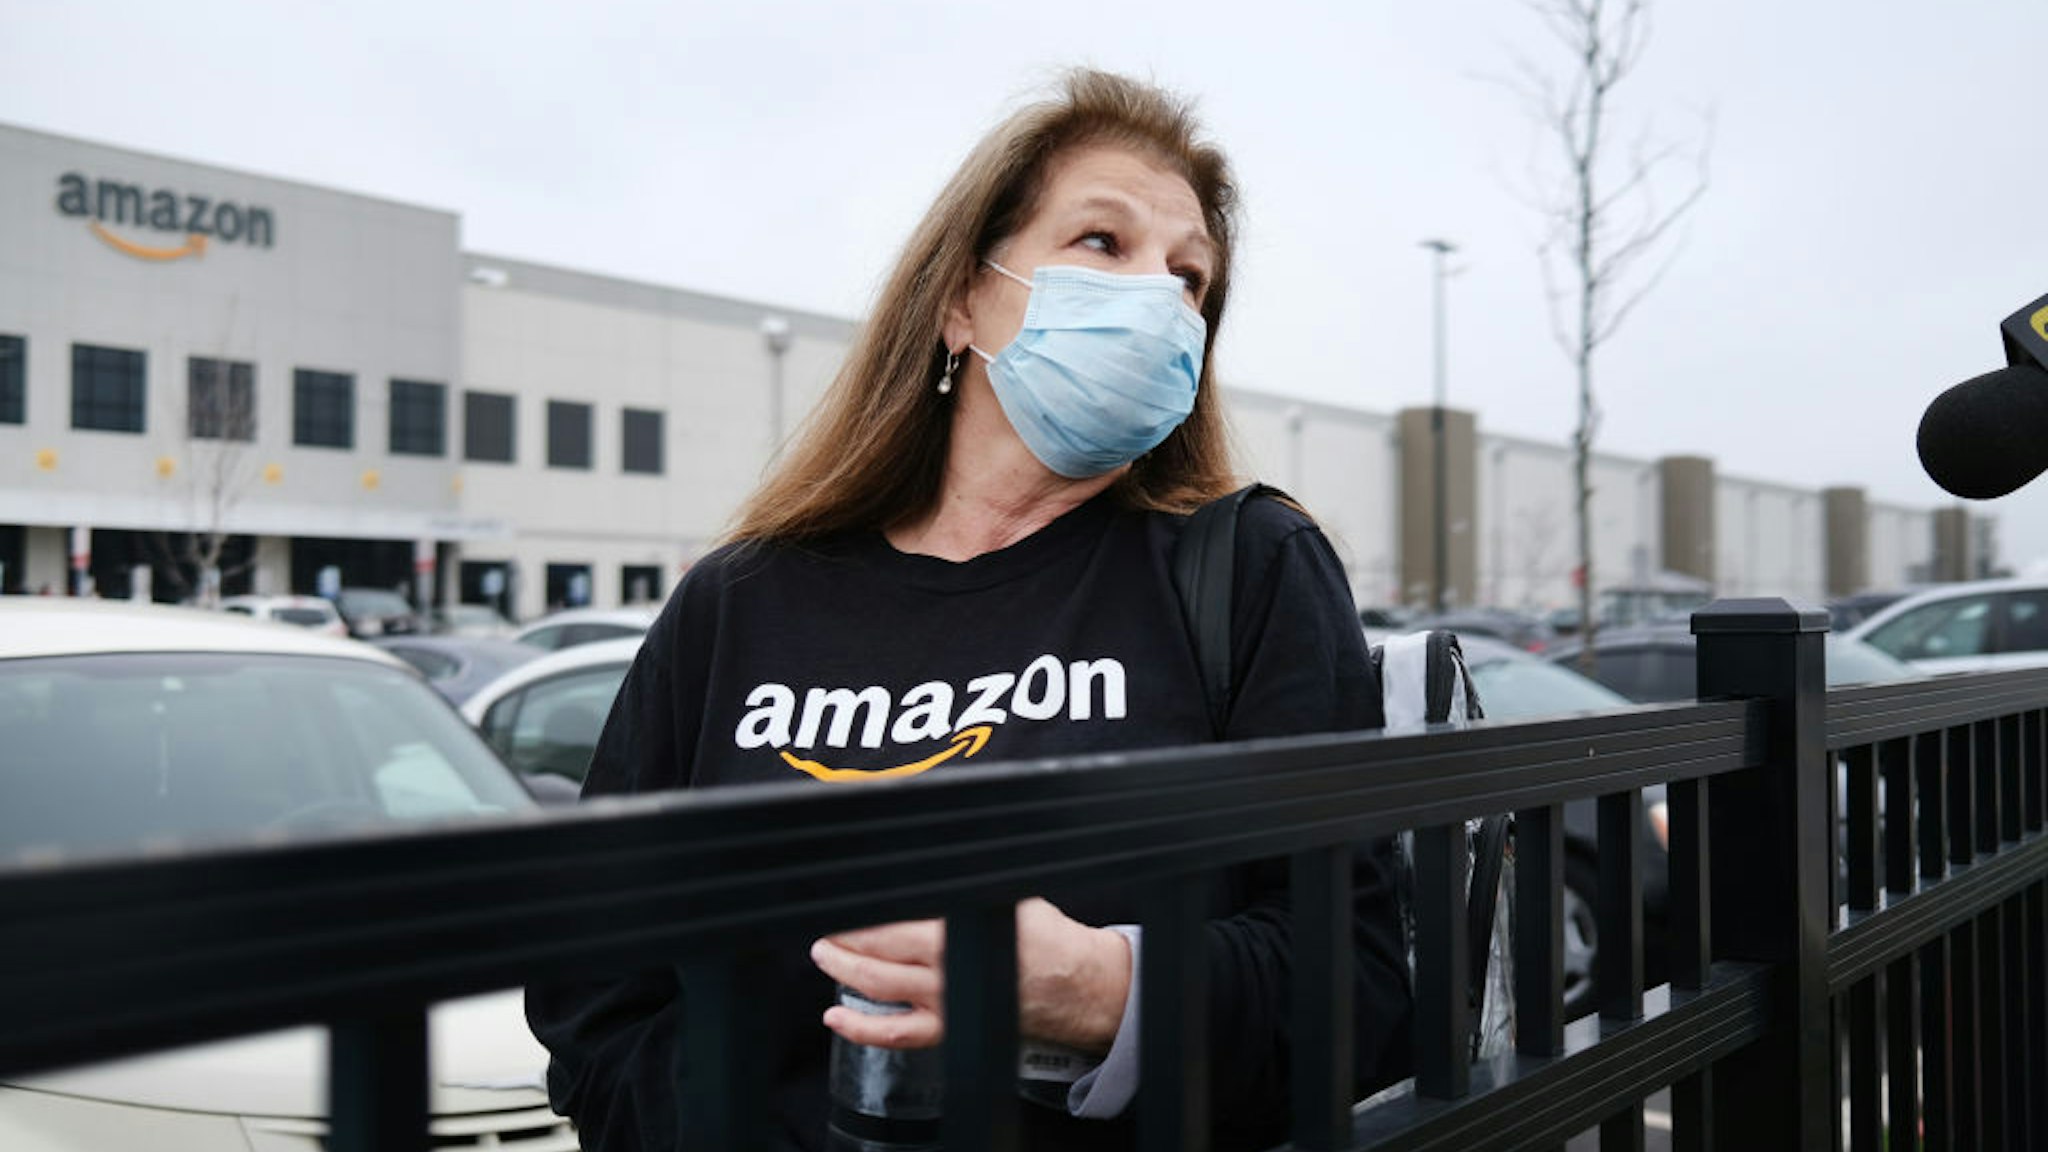 Amazon employees hold a protest and walkout over conditions at the company's Staten Island distribution facility on March 30, 2020 in New York City.